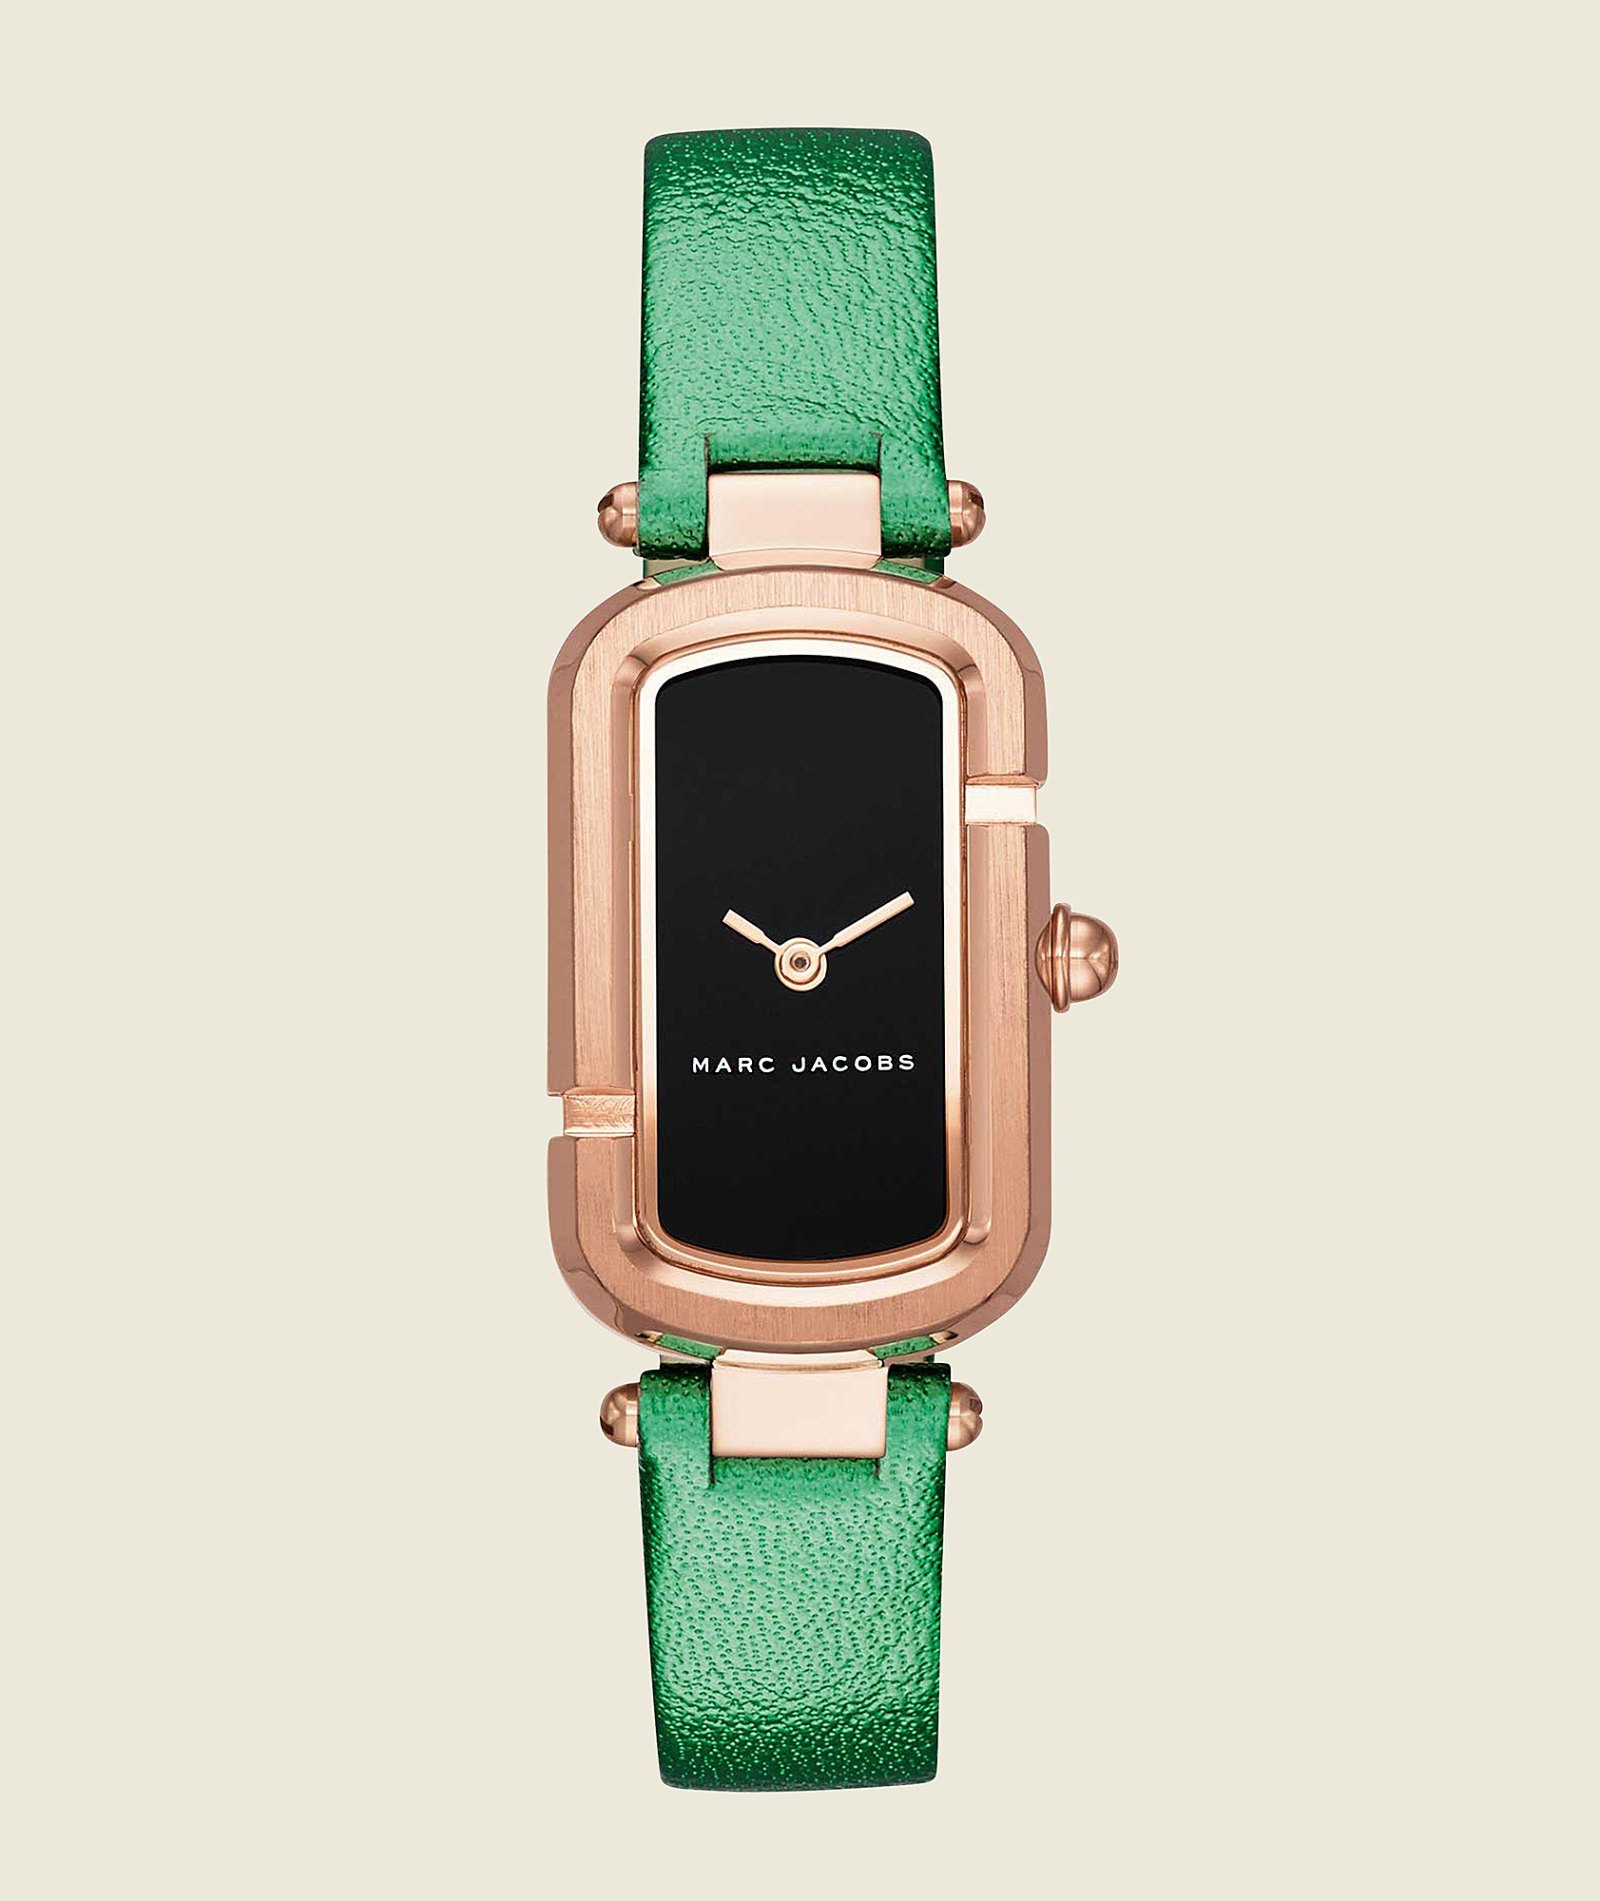 Marc jacobs watch green 4ceed35f 8260 4992 9f93 d90acb520176